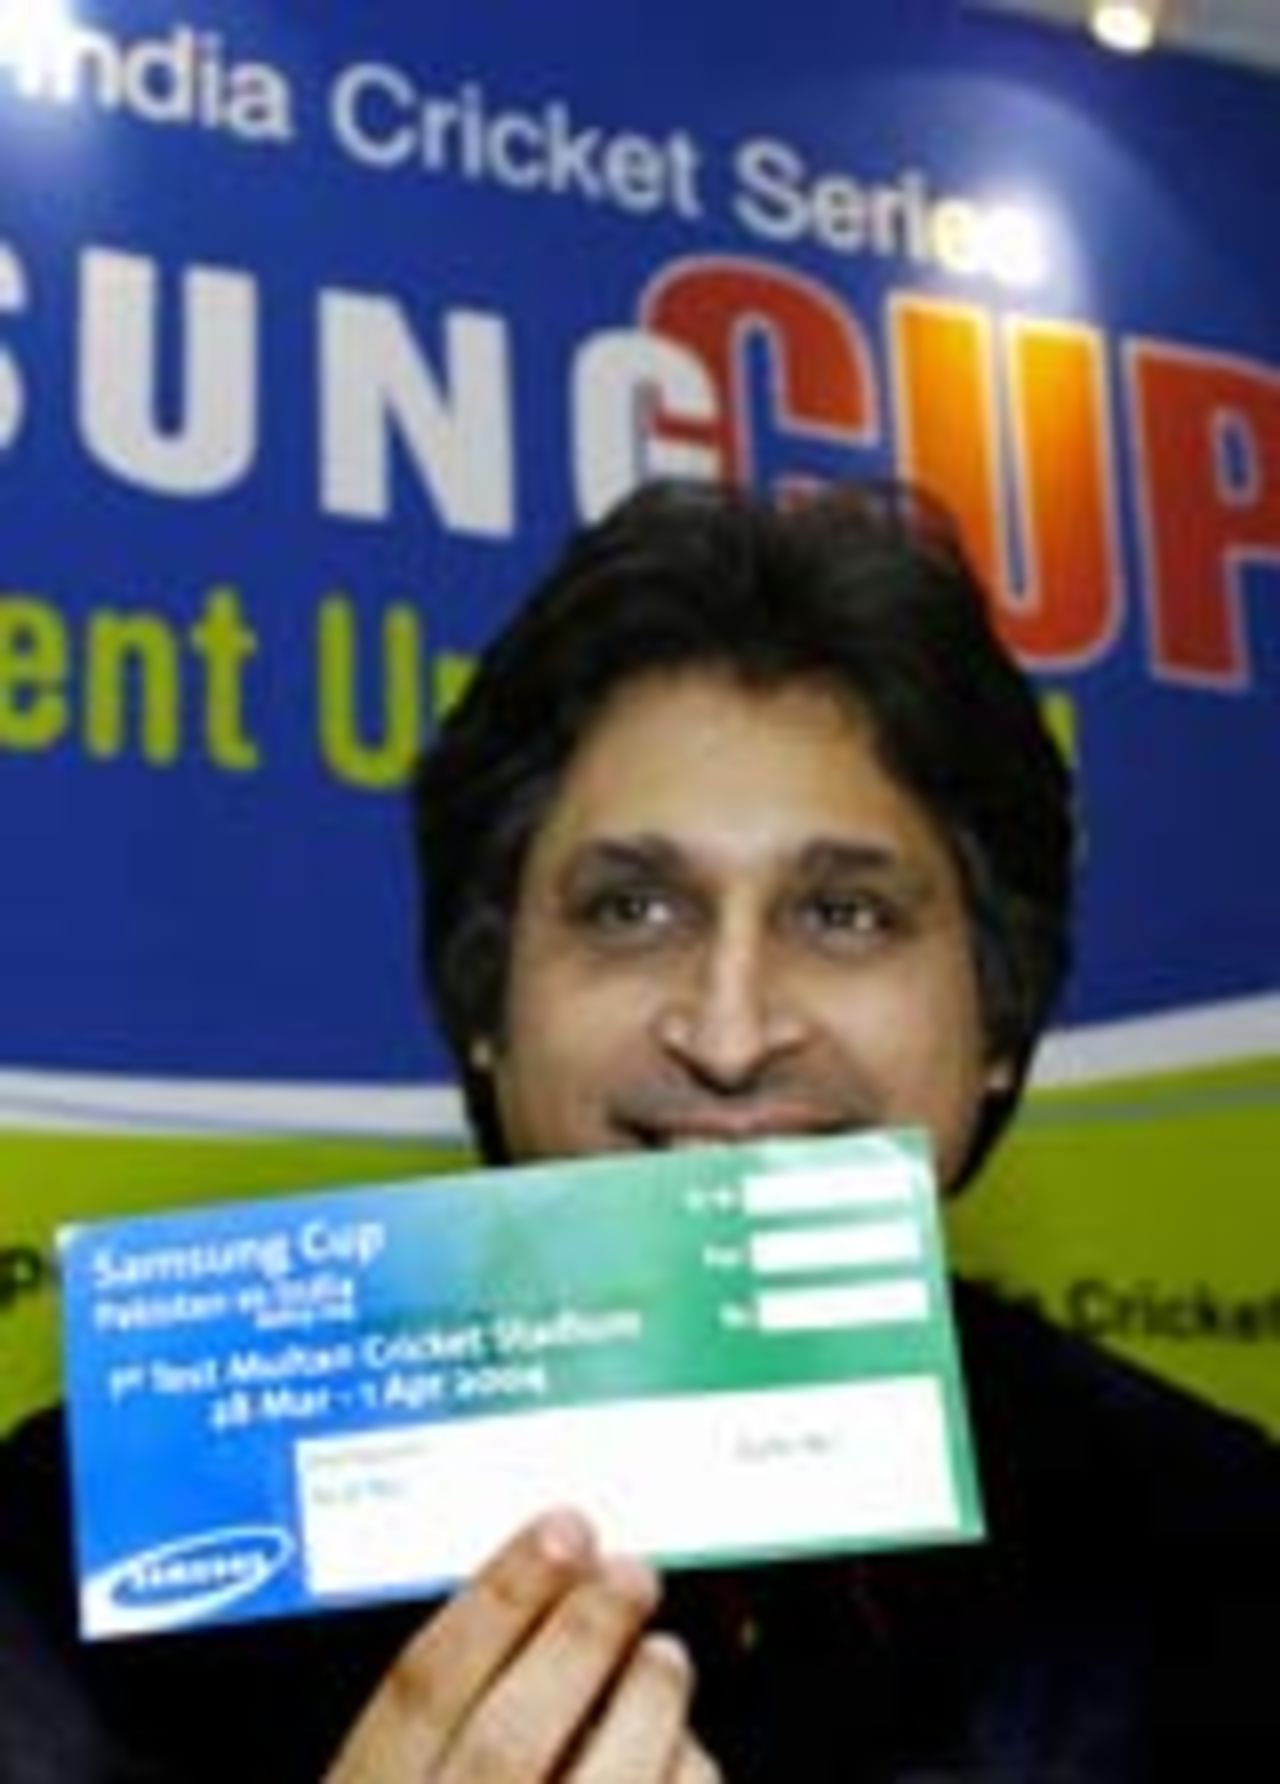 Pakistan board chairman Rameez Raja shows a specimen of a ticket for the series between Pakistan and India, Fenbruary 27, 2004